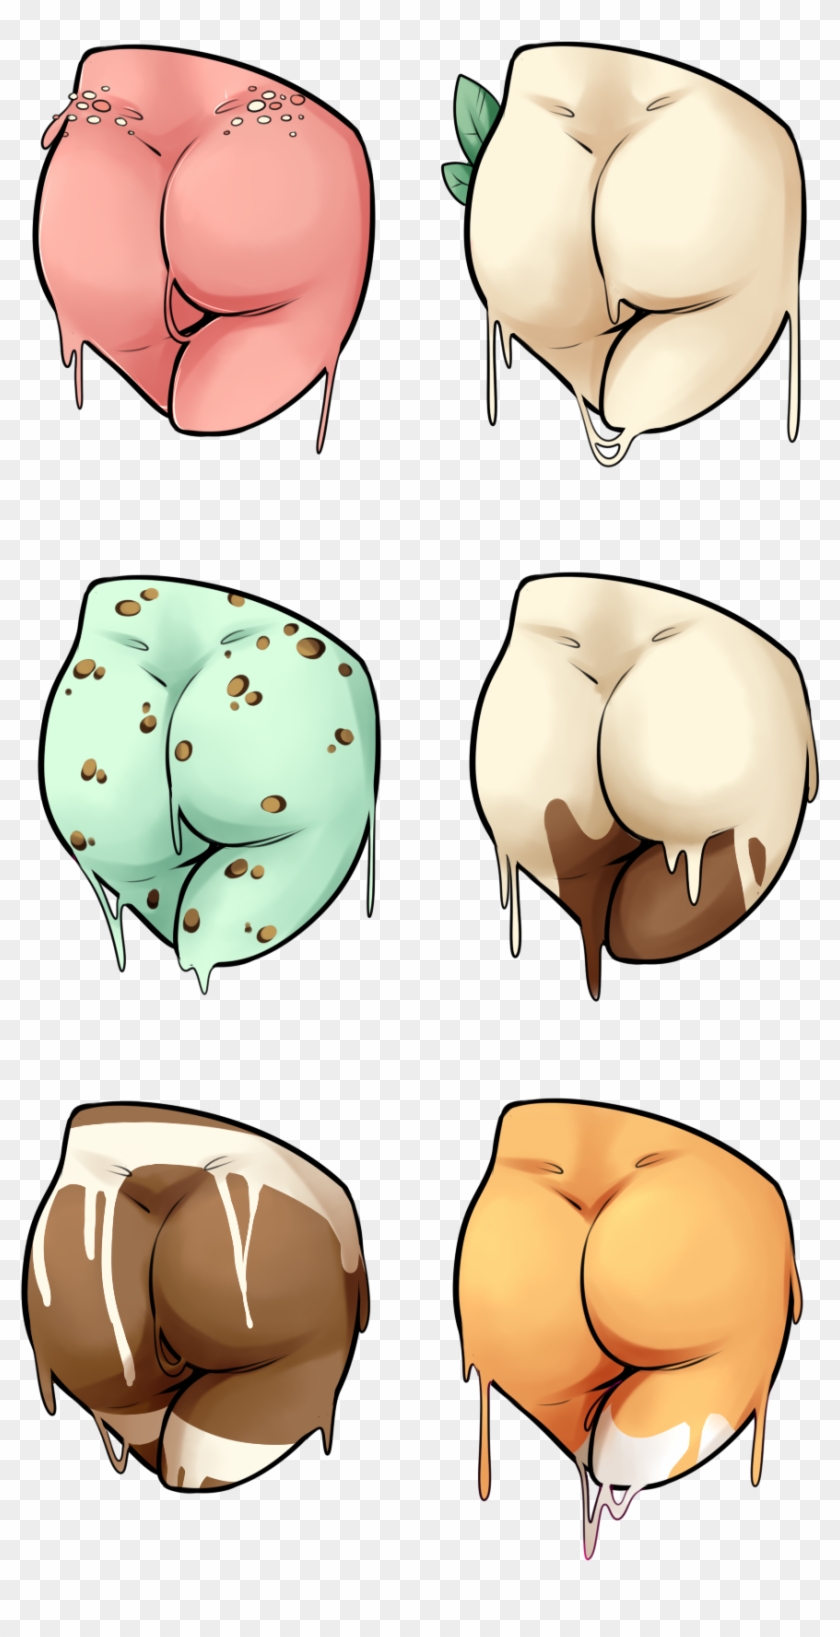 Special Ice Cream Butt Hatchables By M1ssnautilus - Ice Cream On Butt #438105